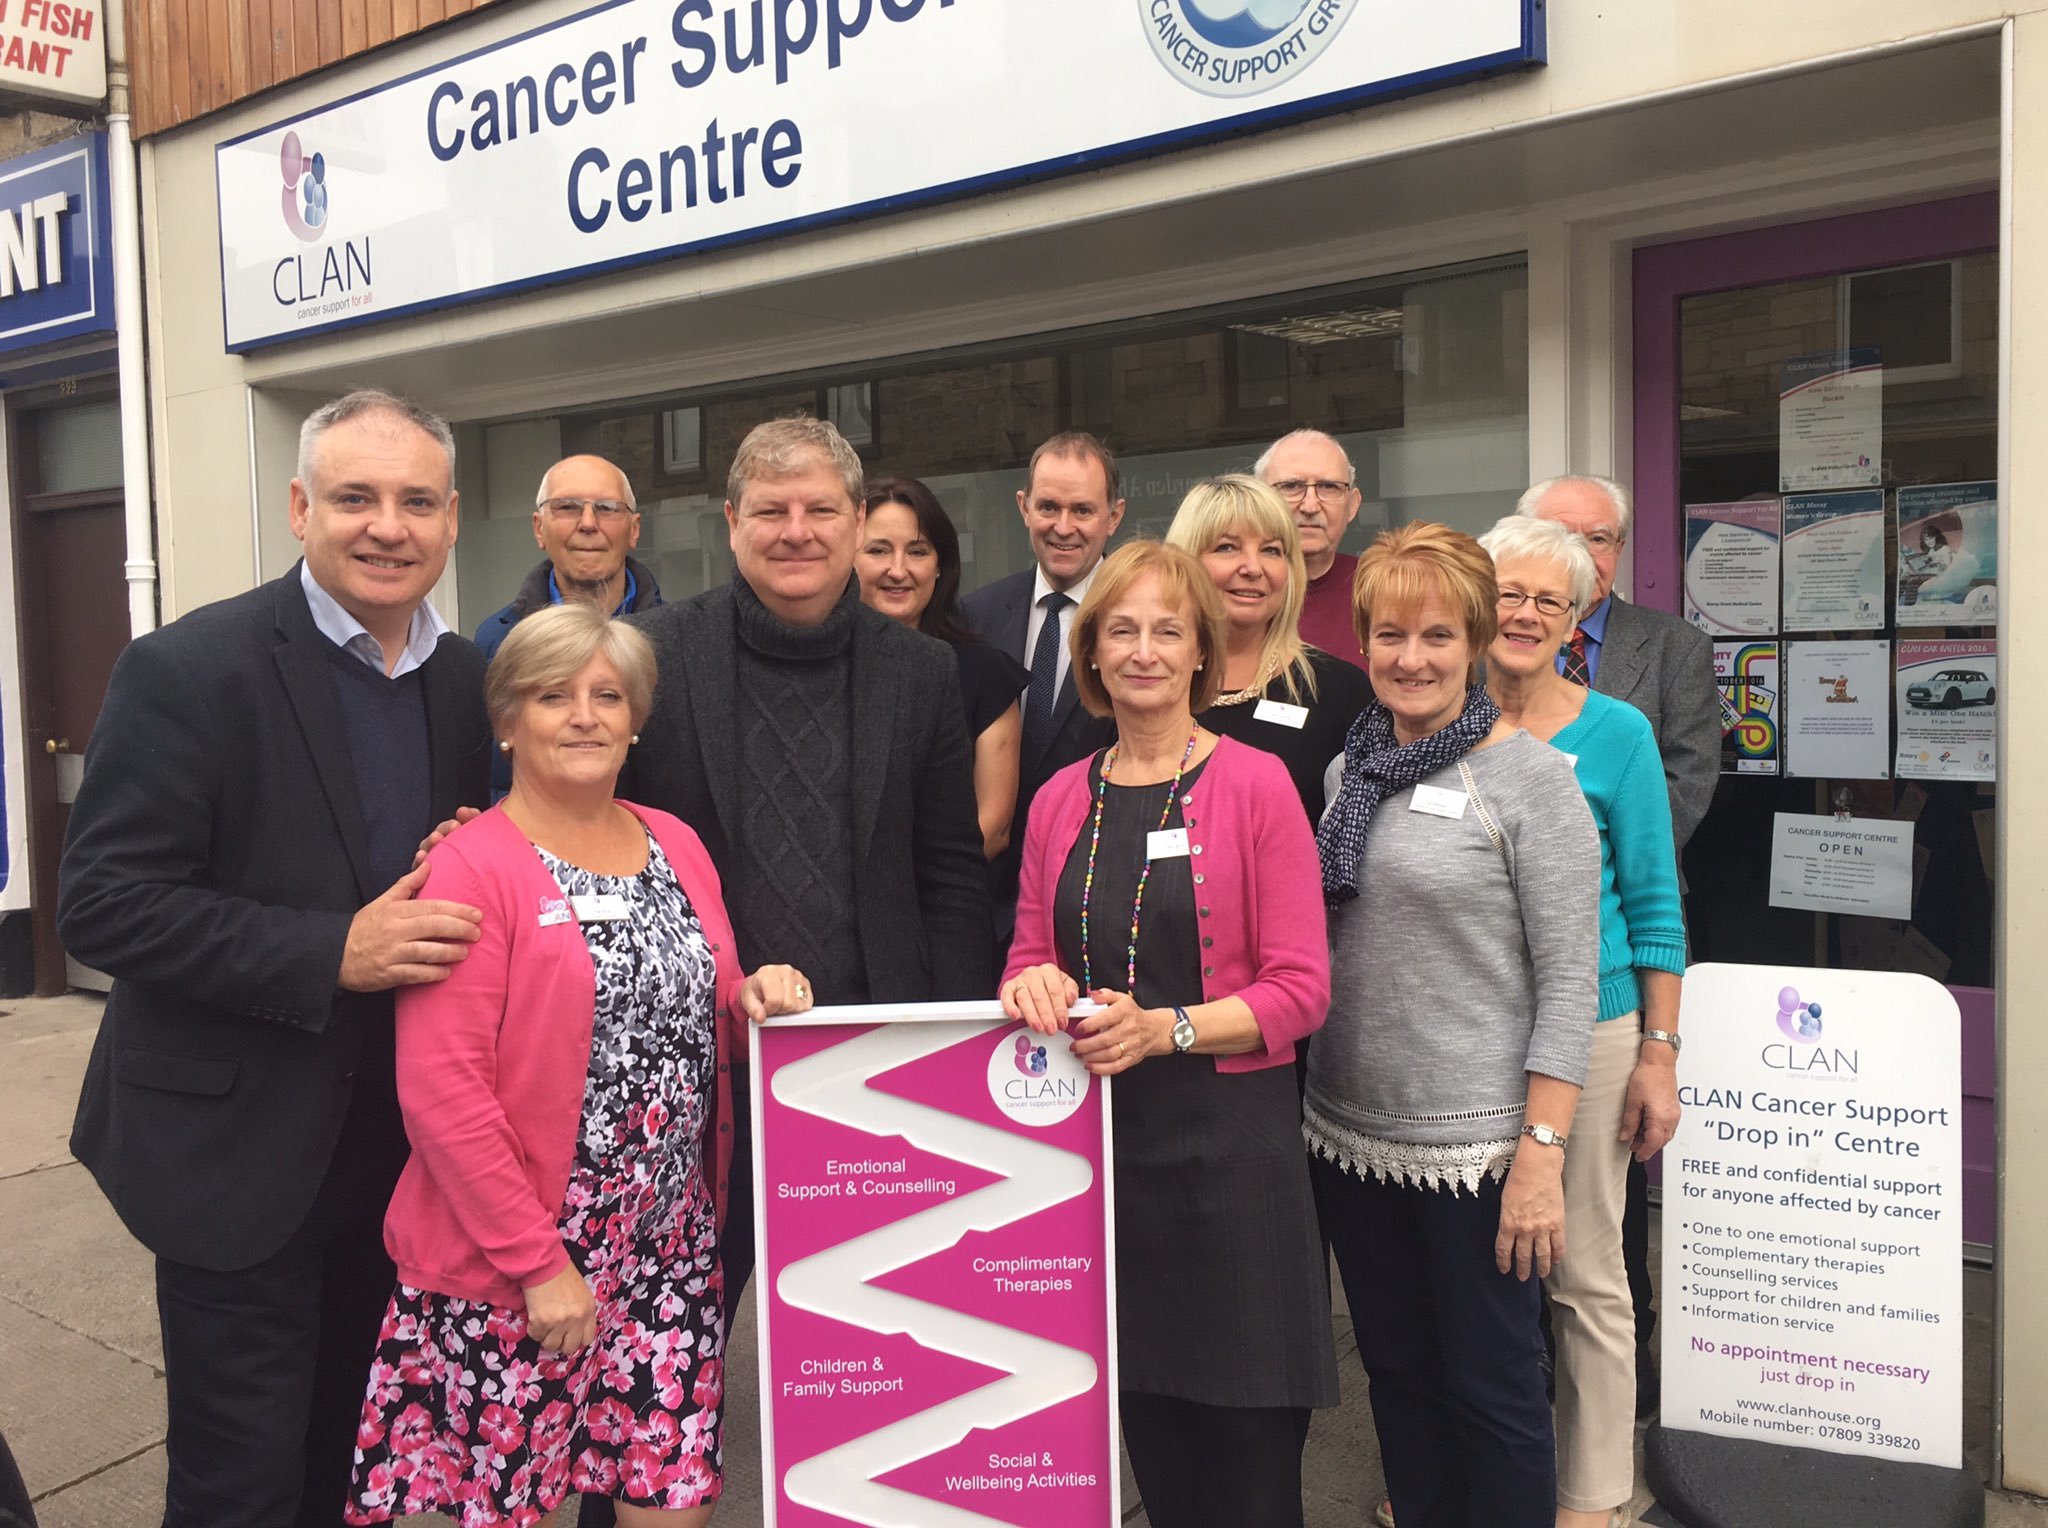 Richard Lochhead and Angus Robertson joined staff and volunteers from Clan at their Elgin shop to launch the competition.